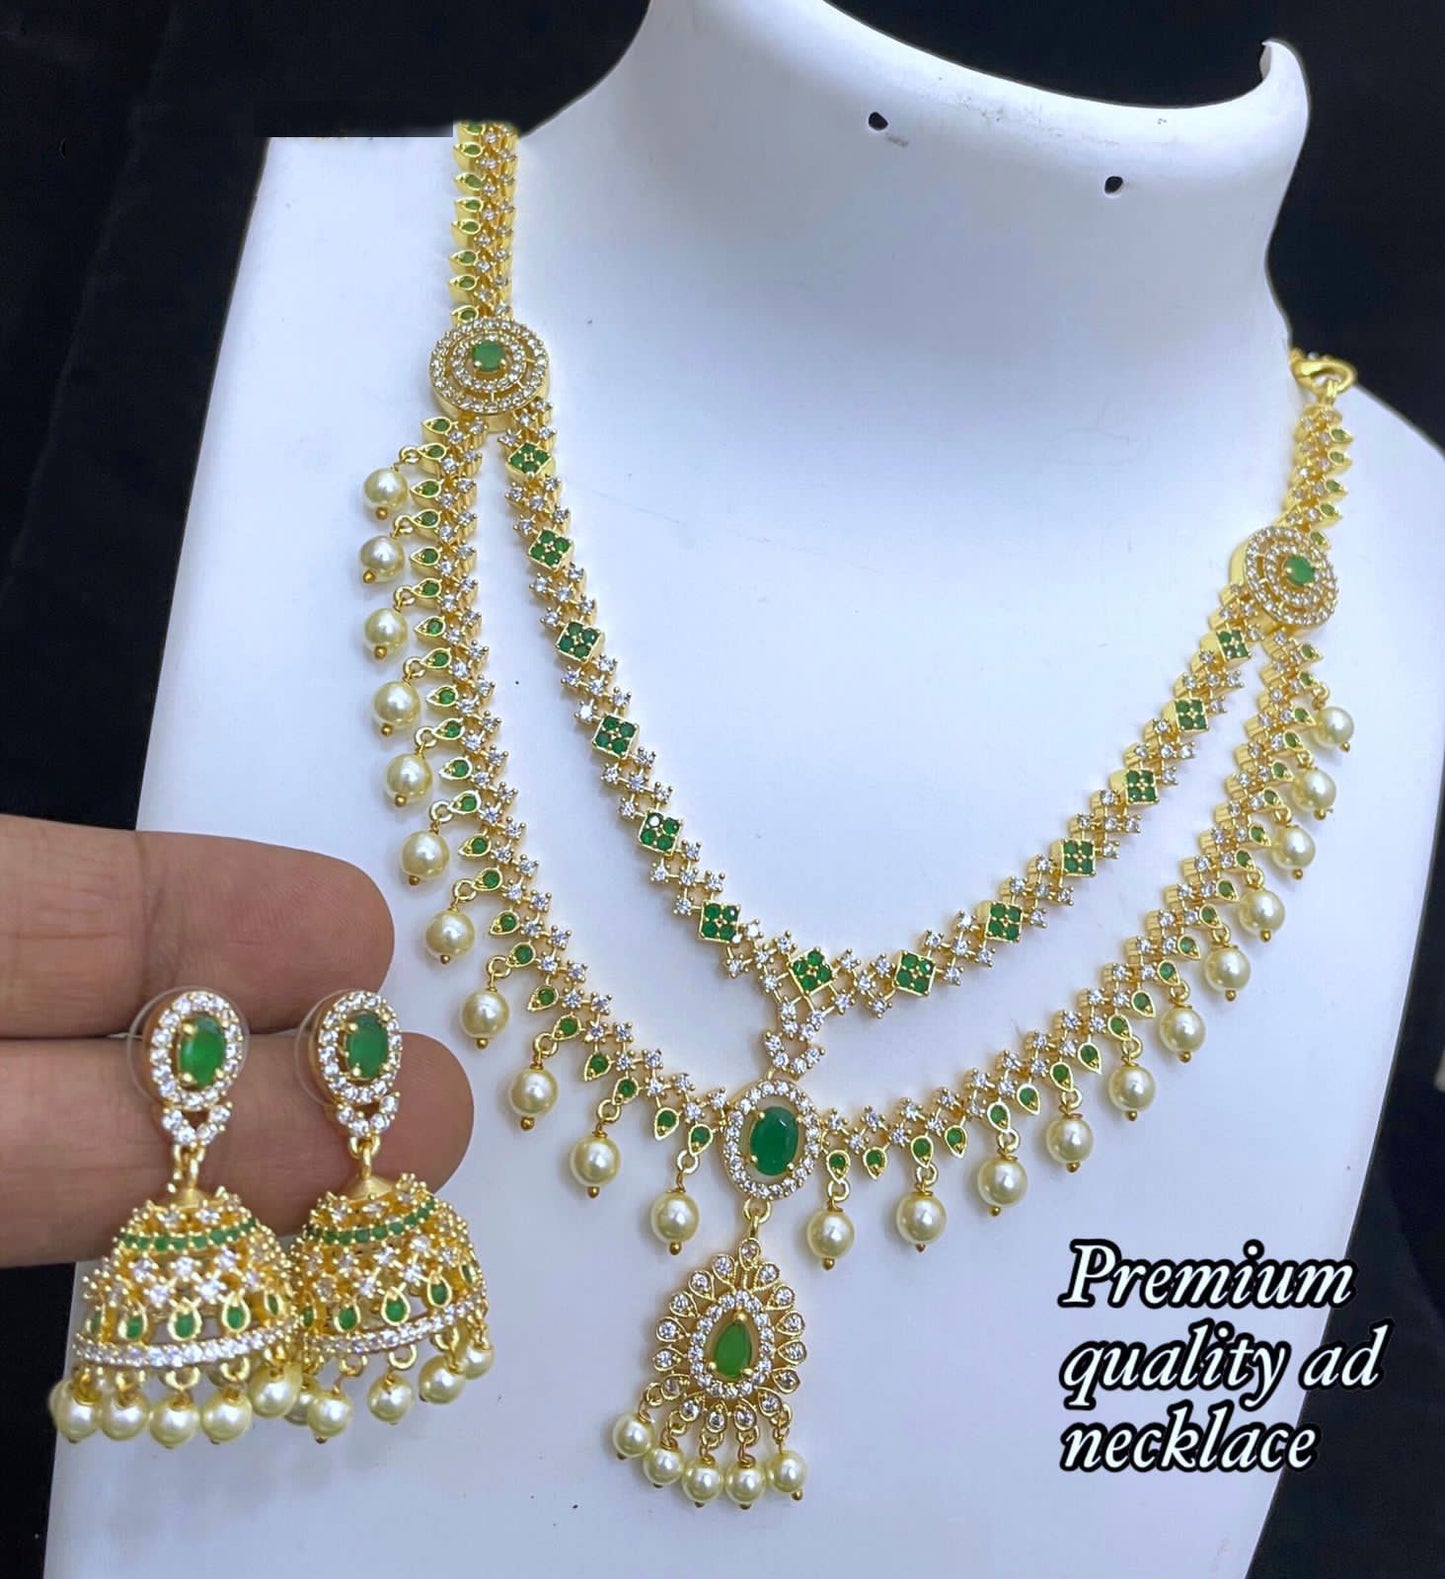 Gorgeous American Diamond Two layer necklace with pearl drops | South Indian style AD color stone Jewelry | Ruby Emerald Crystal Necklace